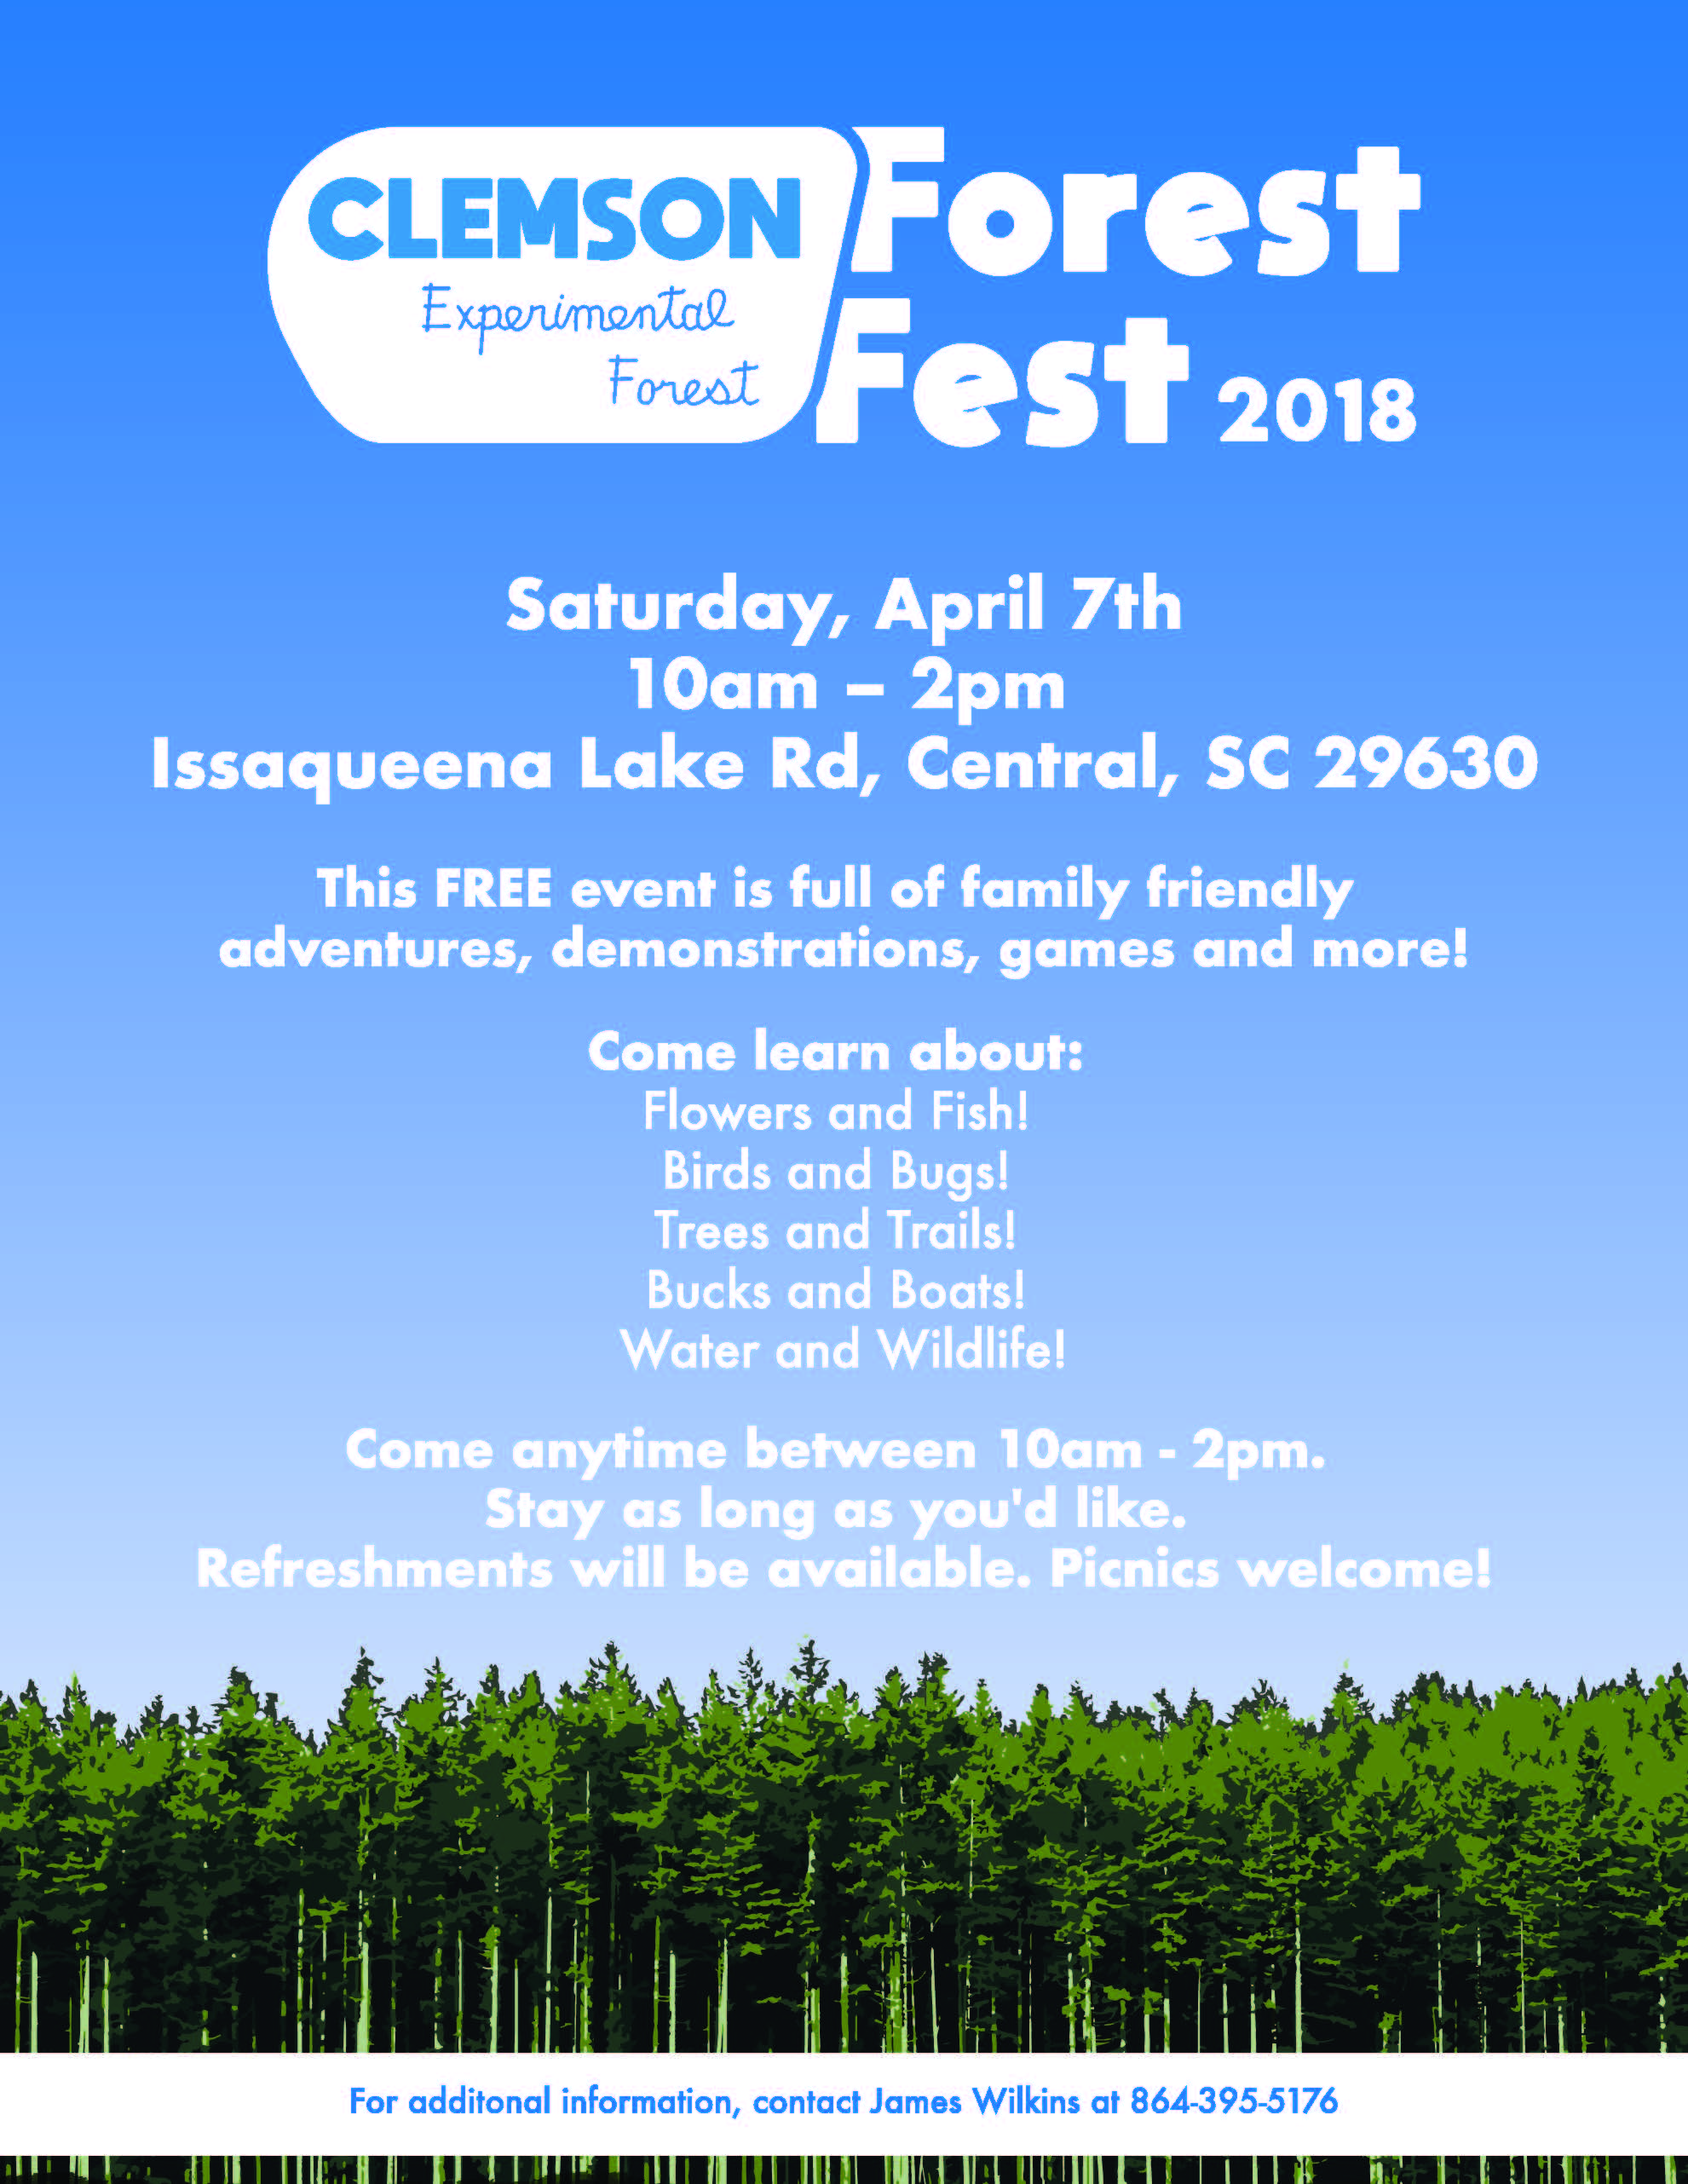 Clemson Forest Fest April 7th, 10am to 2pm Issaqueena Lake Rd Central, SC